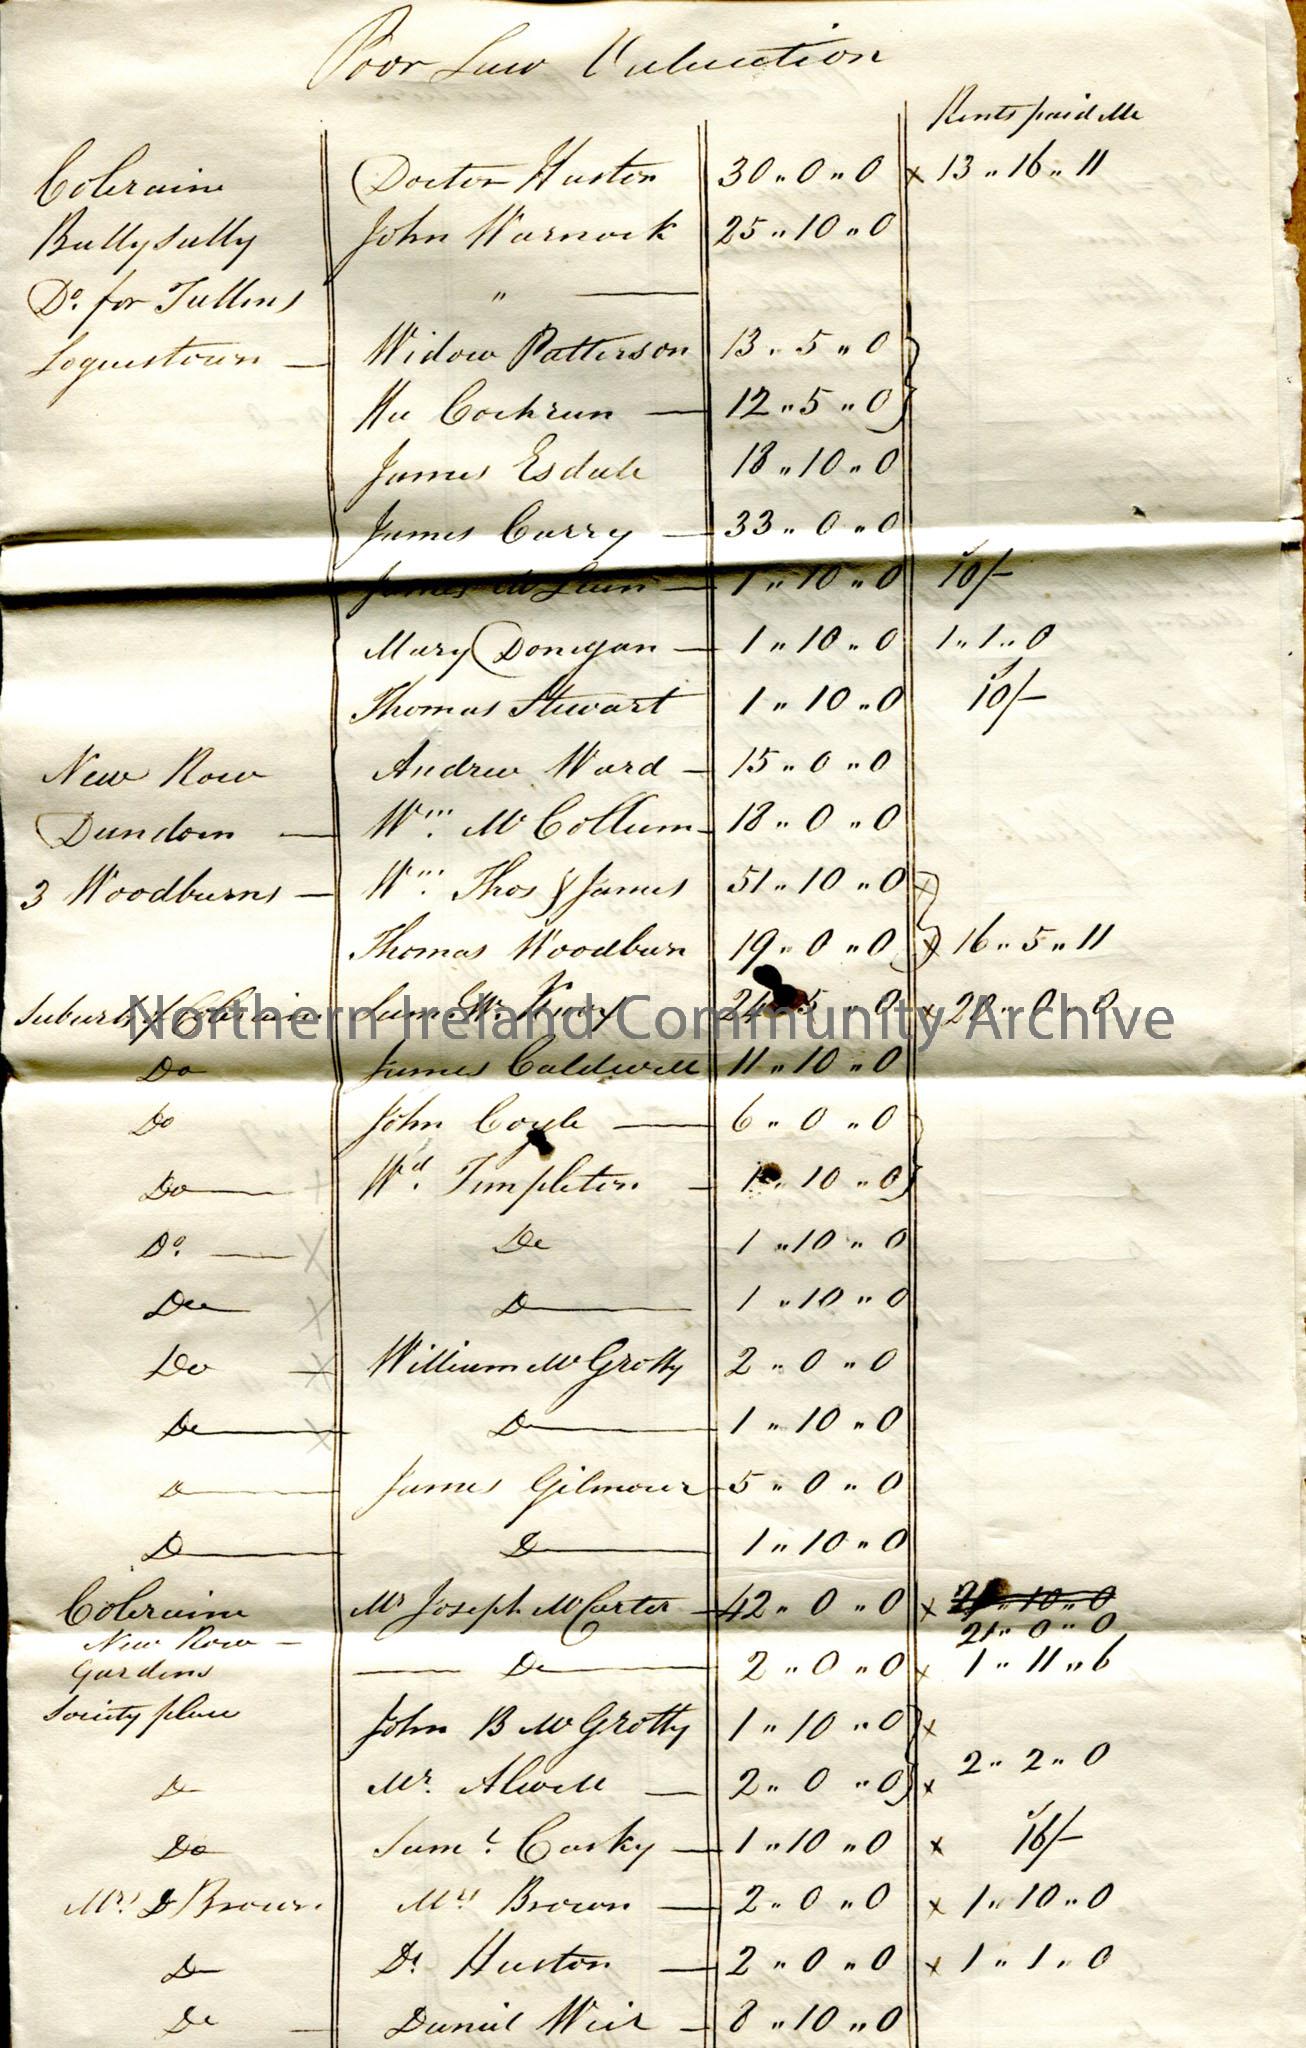 Handwritten list of Poor Law Valuation on double page – names and amounts, with locality in left hand column e.g.Killowen, New Row, Ballysally, Logues…